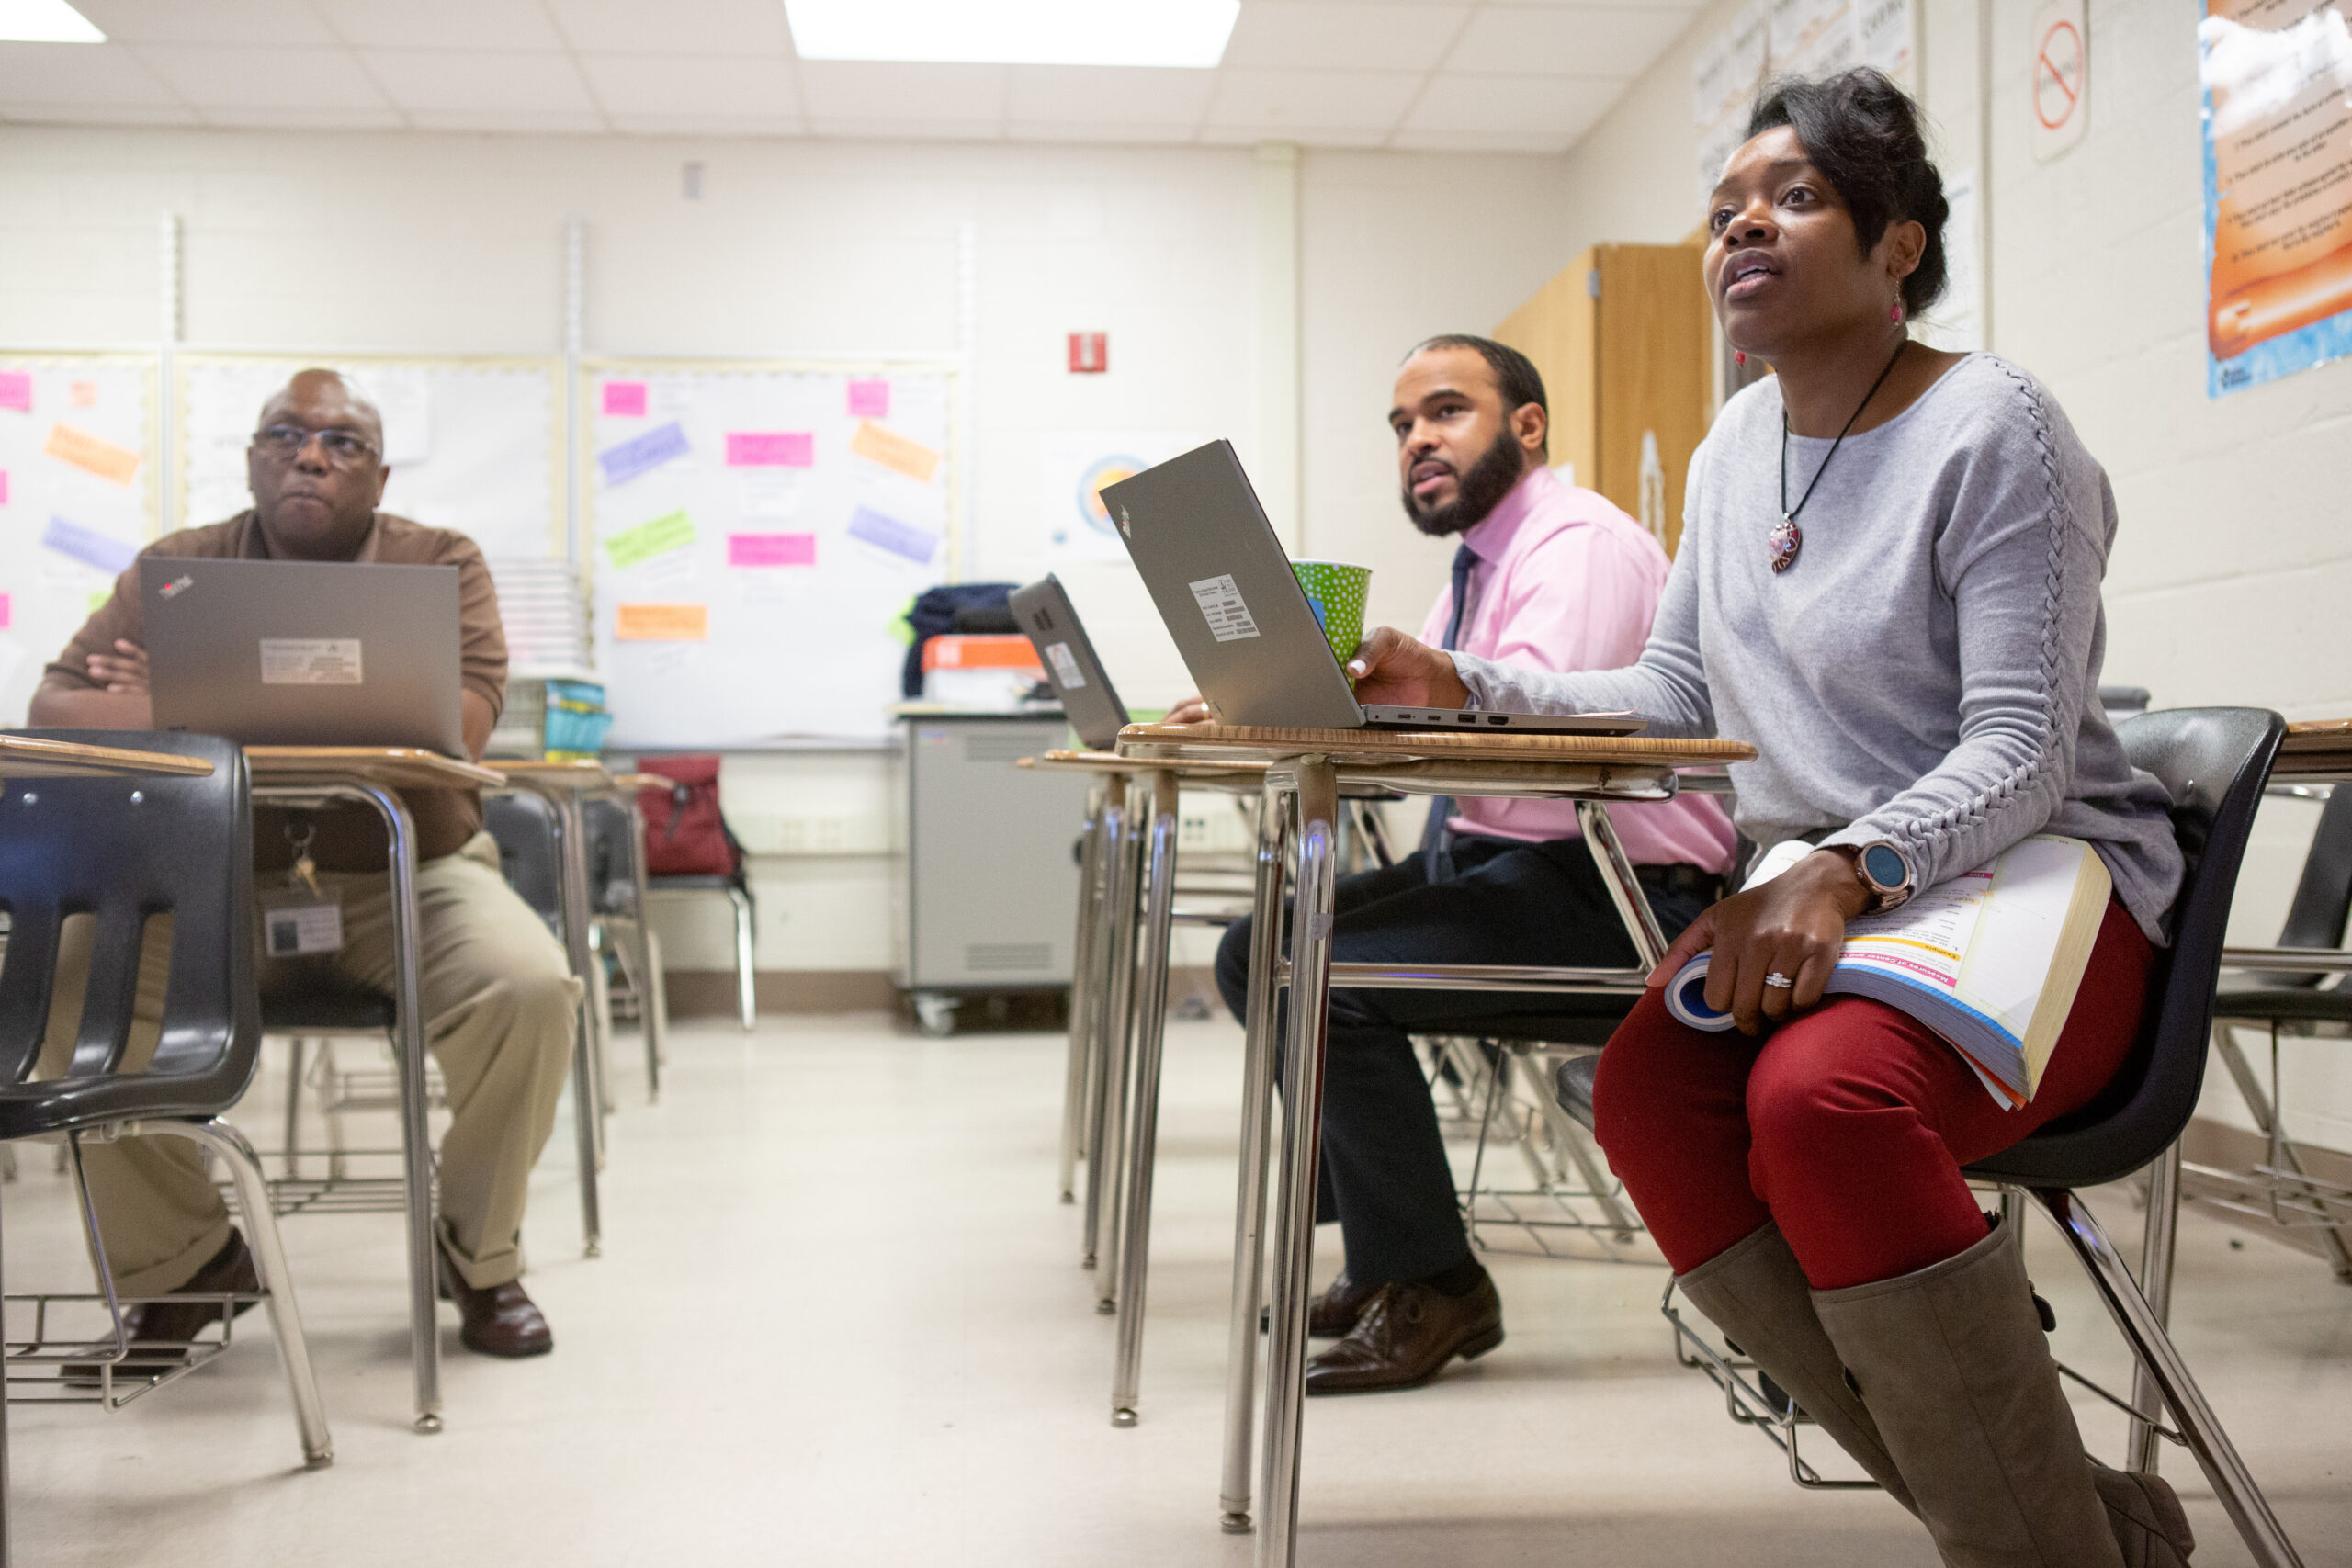 An image of three educators of color who are sitting inside a classroom at desks. They each have a laptop in front of them.